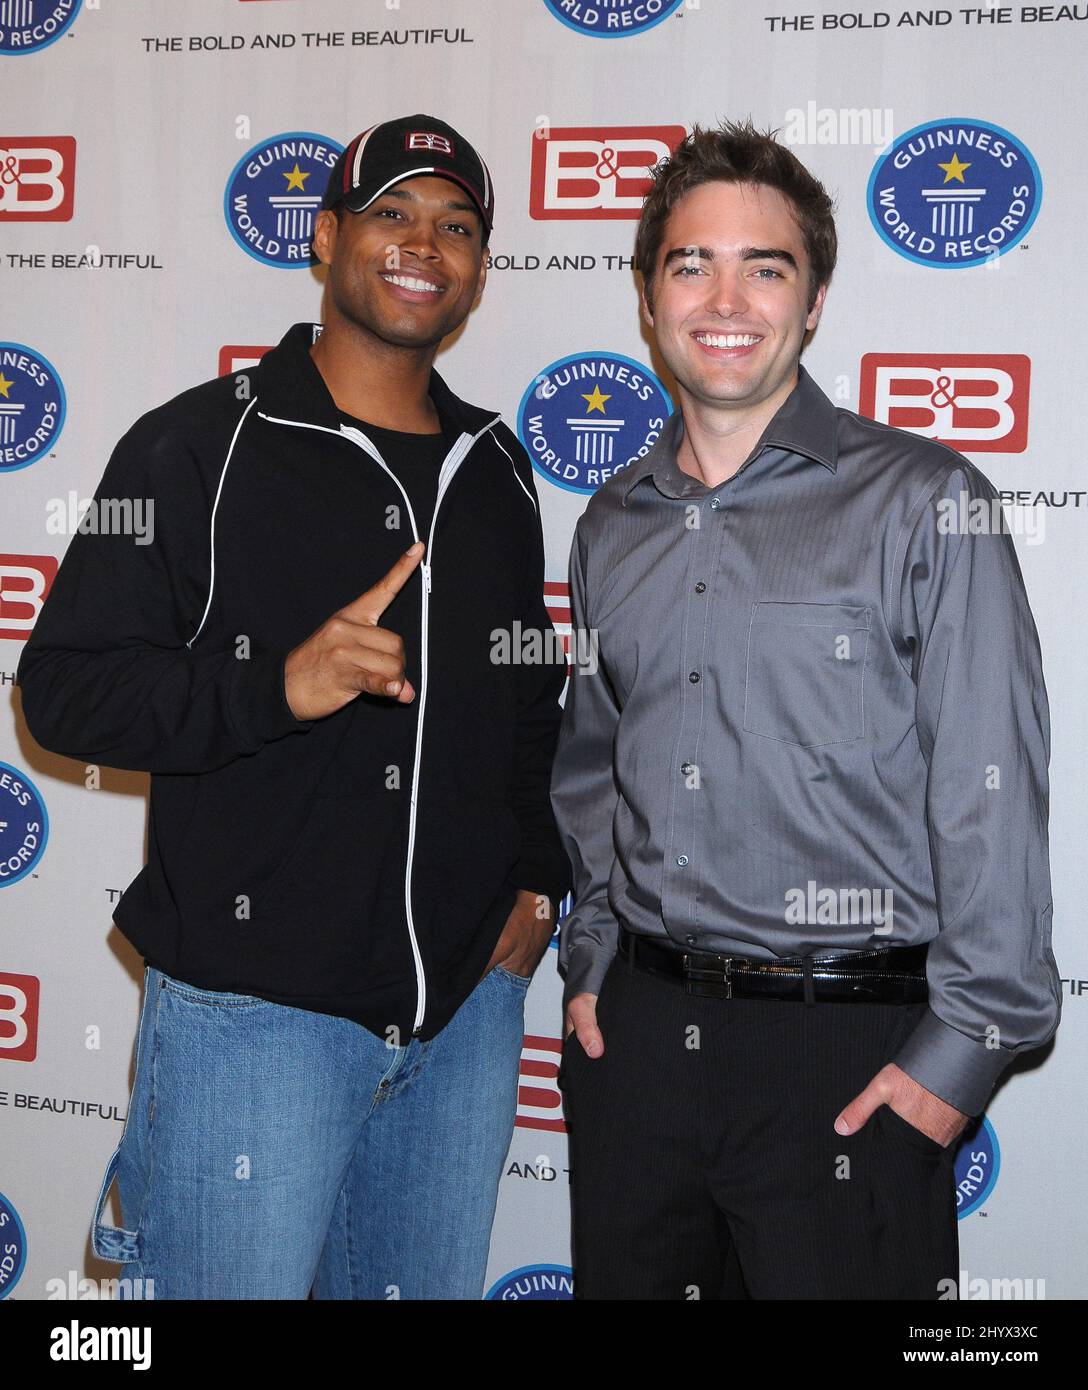 Texas Battle and Drew Tyler Bell during Guinness World Records announcement of 'The Bold and the Beautiful' as most popular daytime TV soap on stage 31 at CBS Television City, Los Angeles Stock Photo